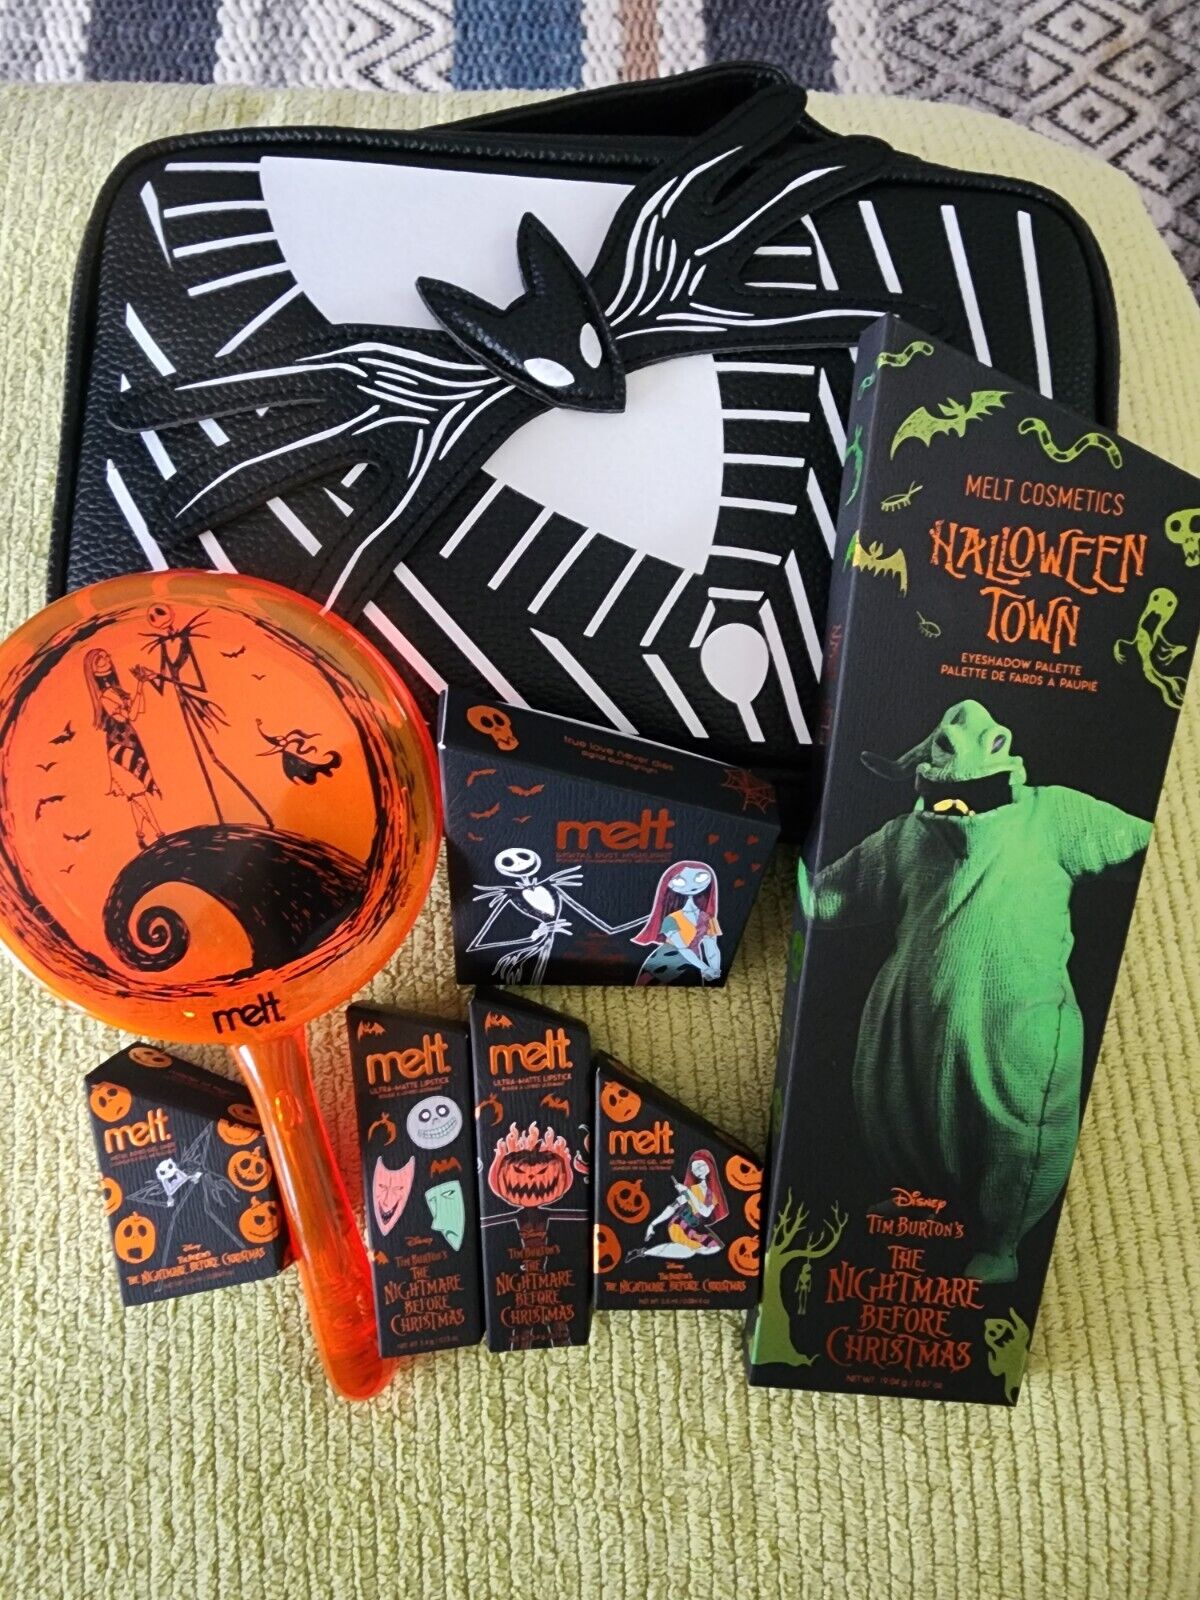 Melt Cosmetics Halloween Town Full Collection - SOLD OUT!